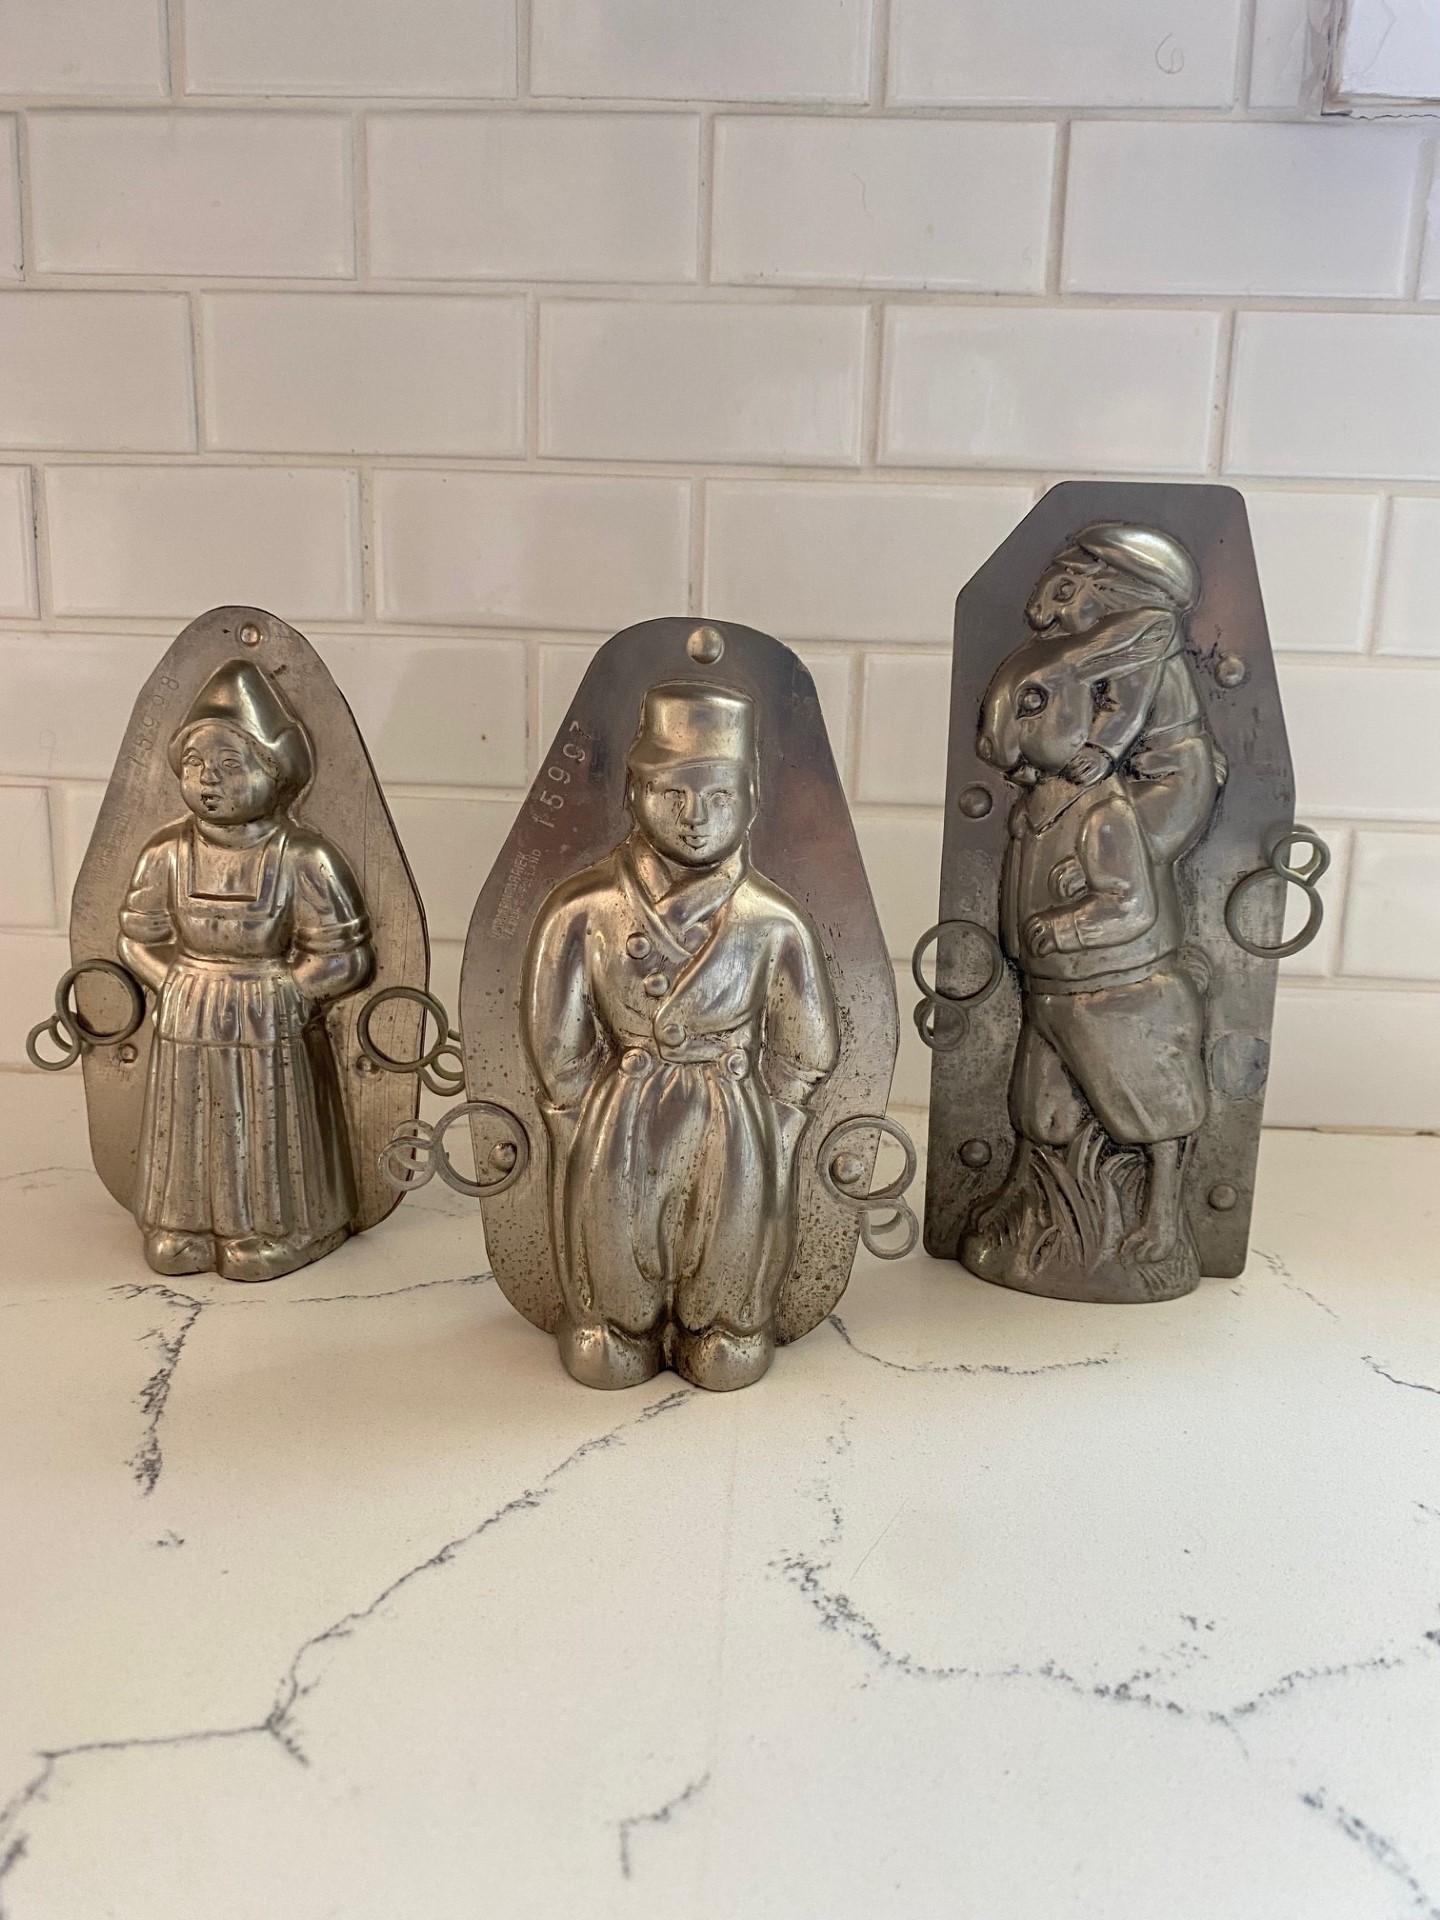 Set of 3 vintage Belgian chocolate molds.  The set includes pair of Belgian children dressed in traditional costume of the Flanders region of Belgium close to the border of Holland and Bunny mold is traditionally vintage in aesthetic.  The